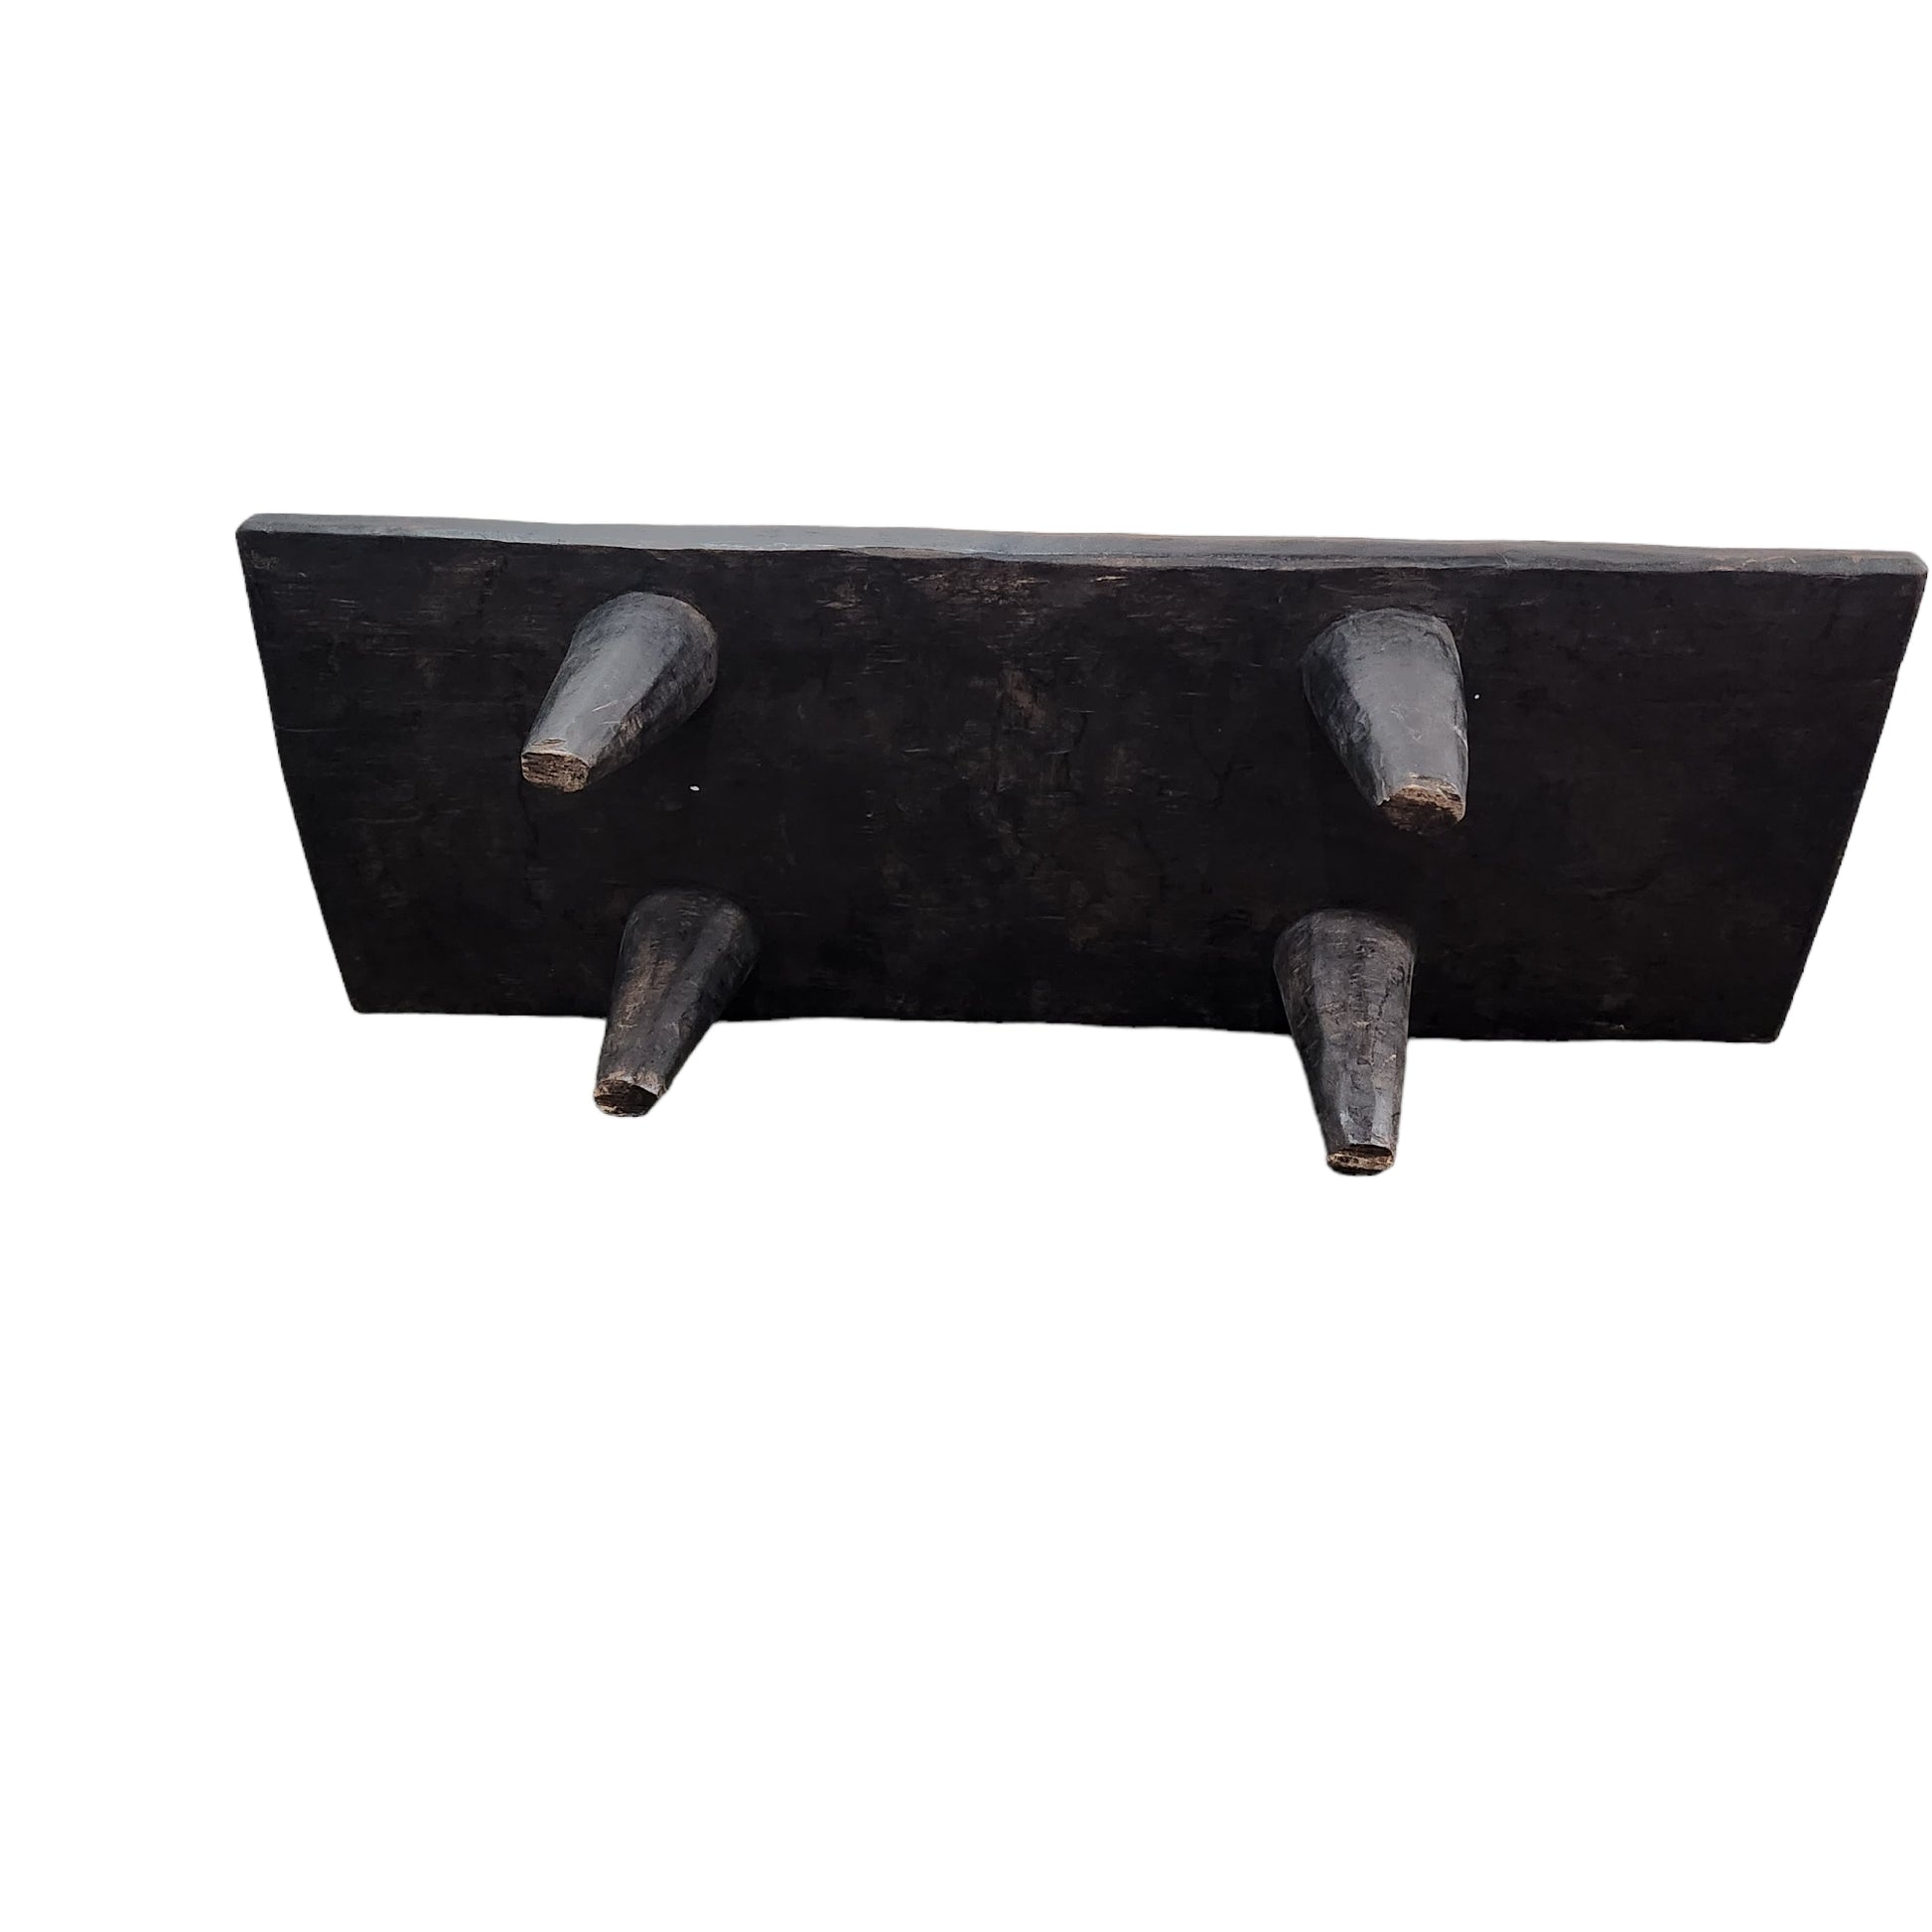 Senufo Bench from Ivory Coast (20th Century) - MD African Art